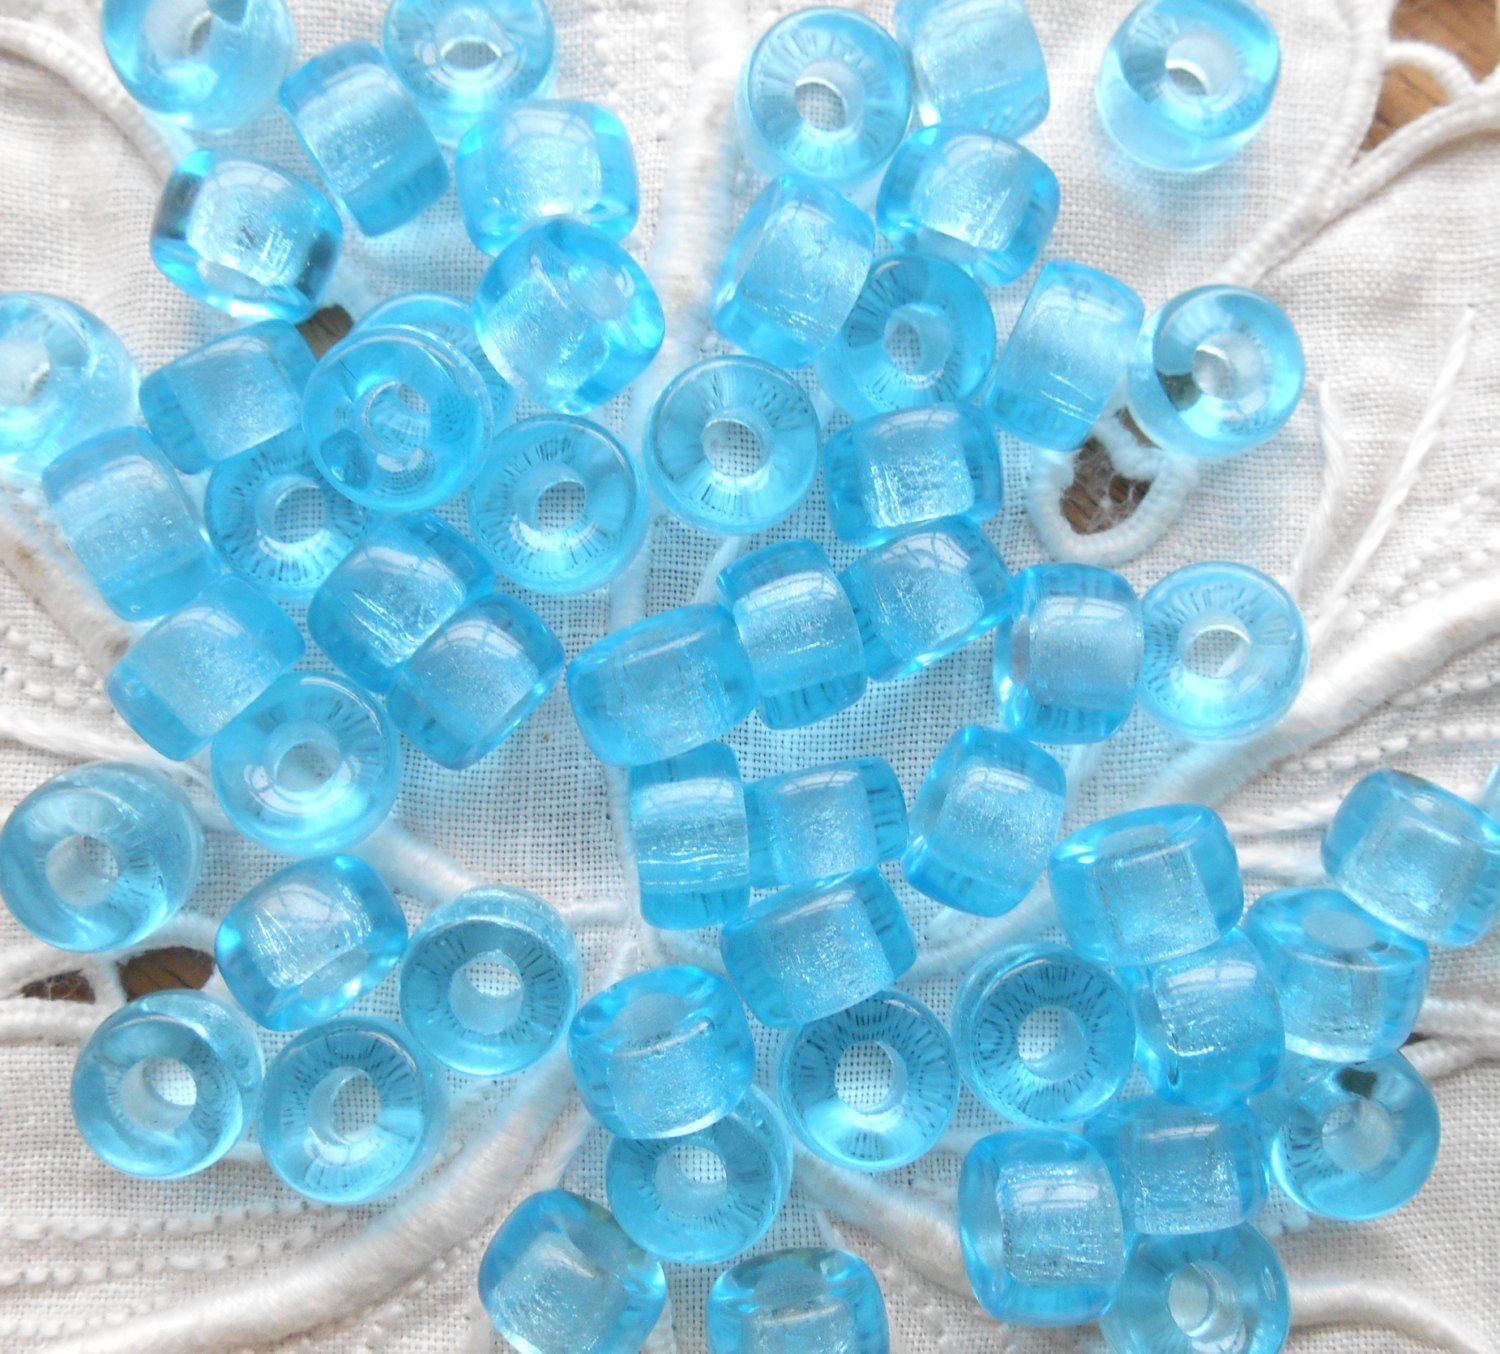 25 9mm Czech opaque turquoise blue pony roller beads, large hole